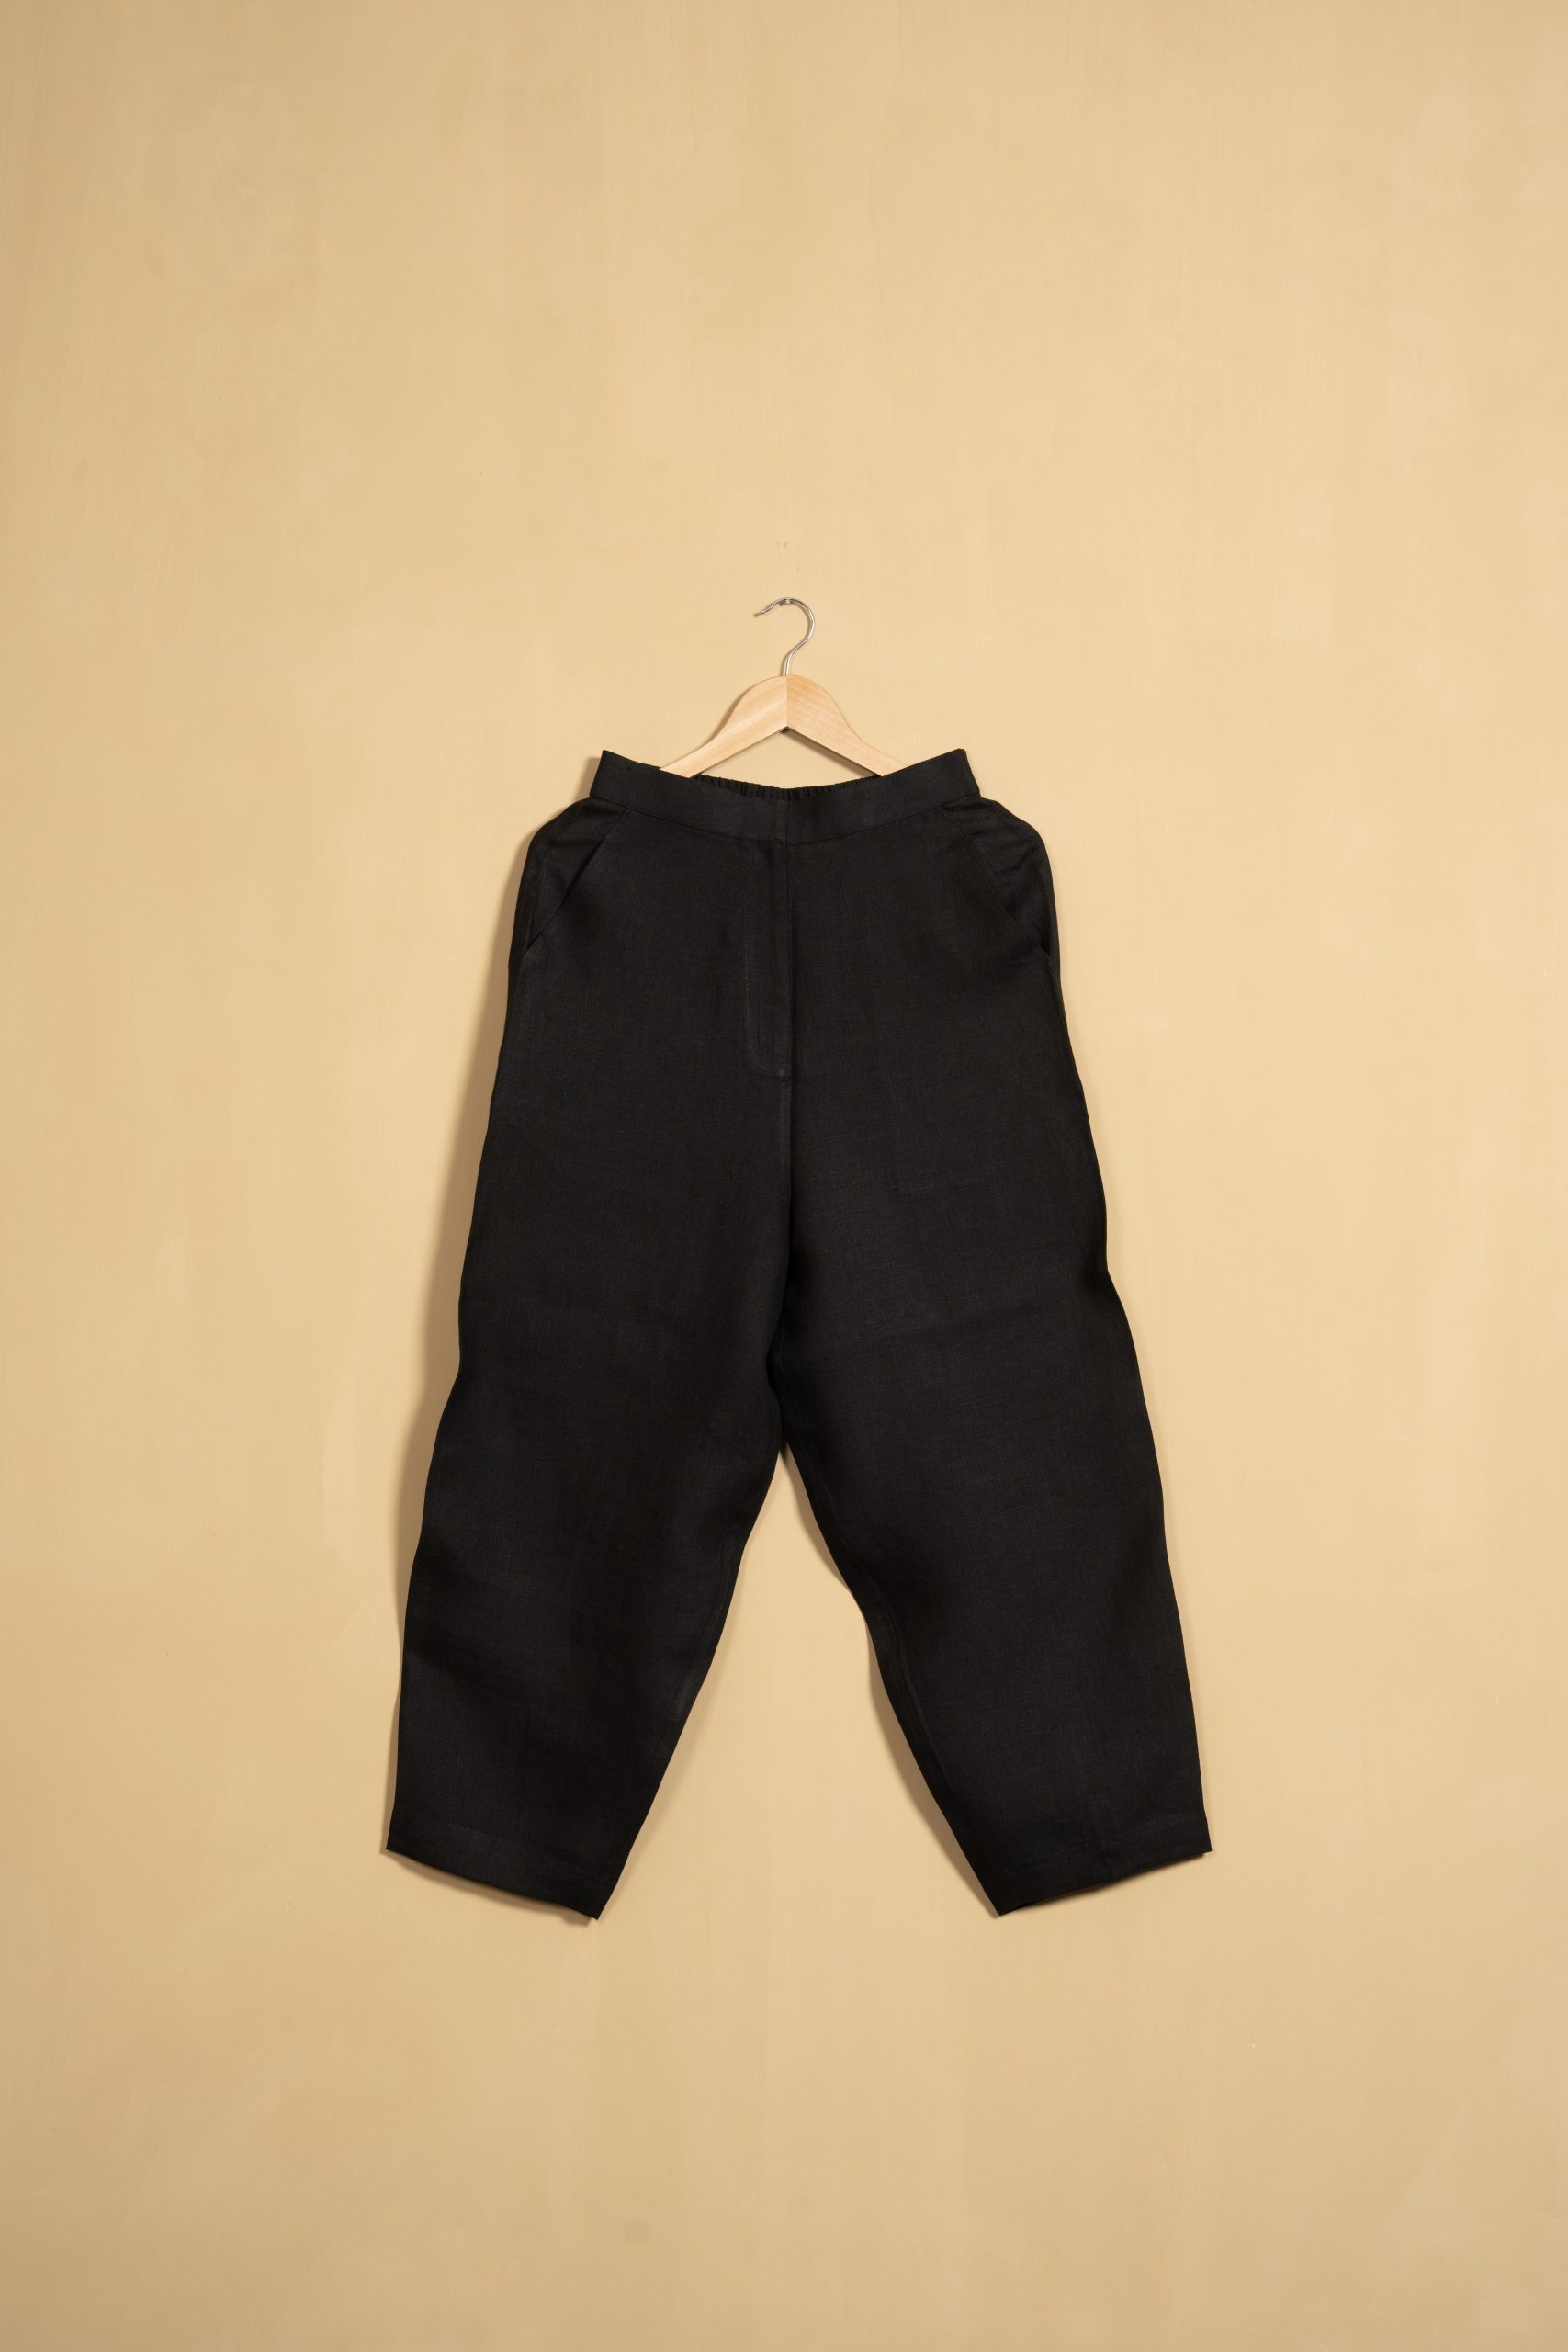 Black Balloon Pants Jumpsuit Design by Mati at Pernia's Pop Up Shop 2024